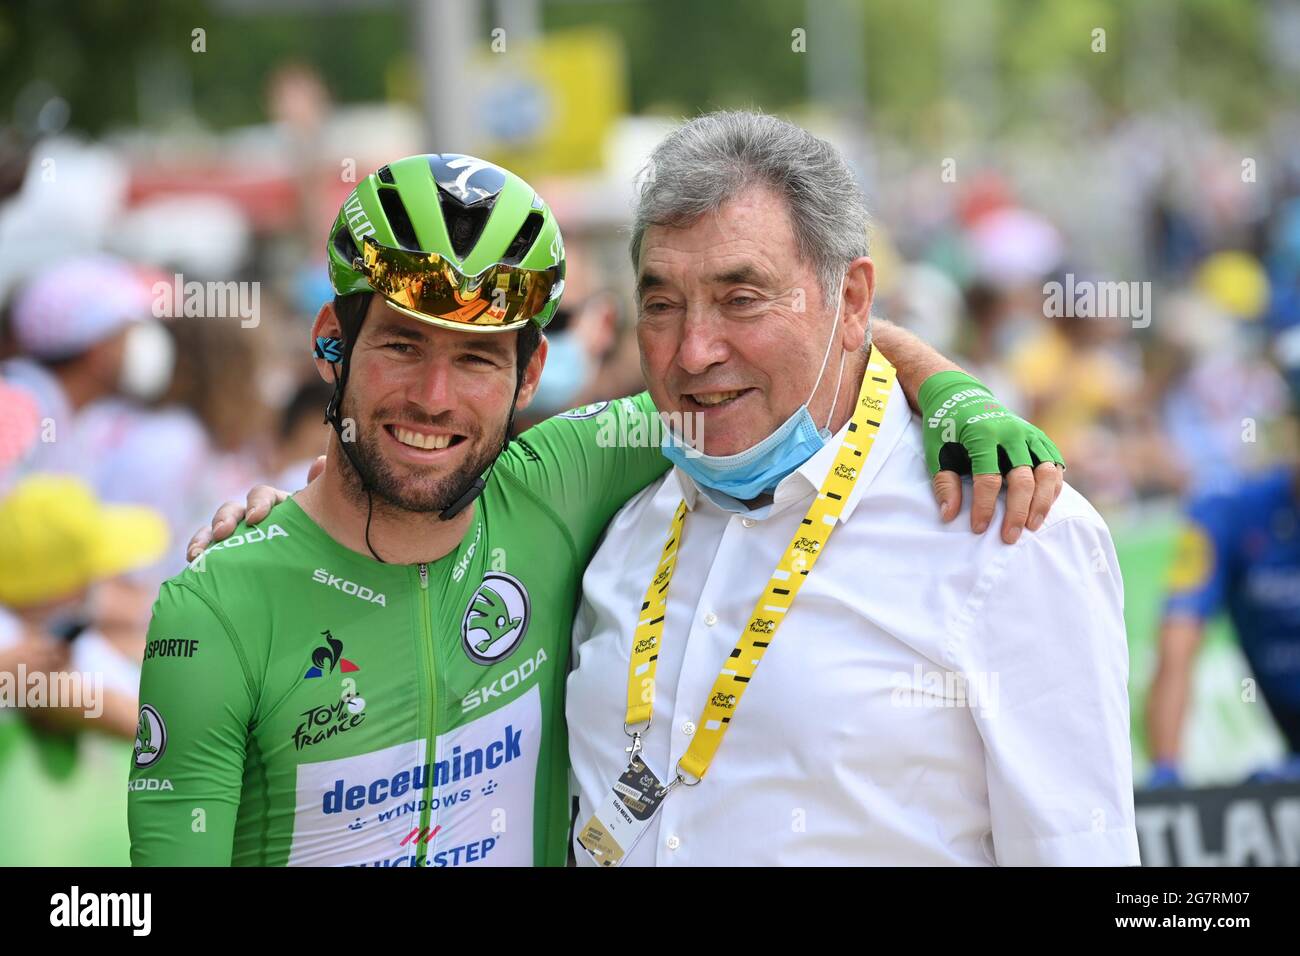 British Mark Cavendish of Deceuninck - Quick-Step wearing the green jersey  of leader in the sprint ranking and Former Belgian cyclist Eddy Merckx pict  Stock Photo - Alamy